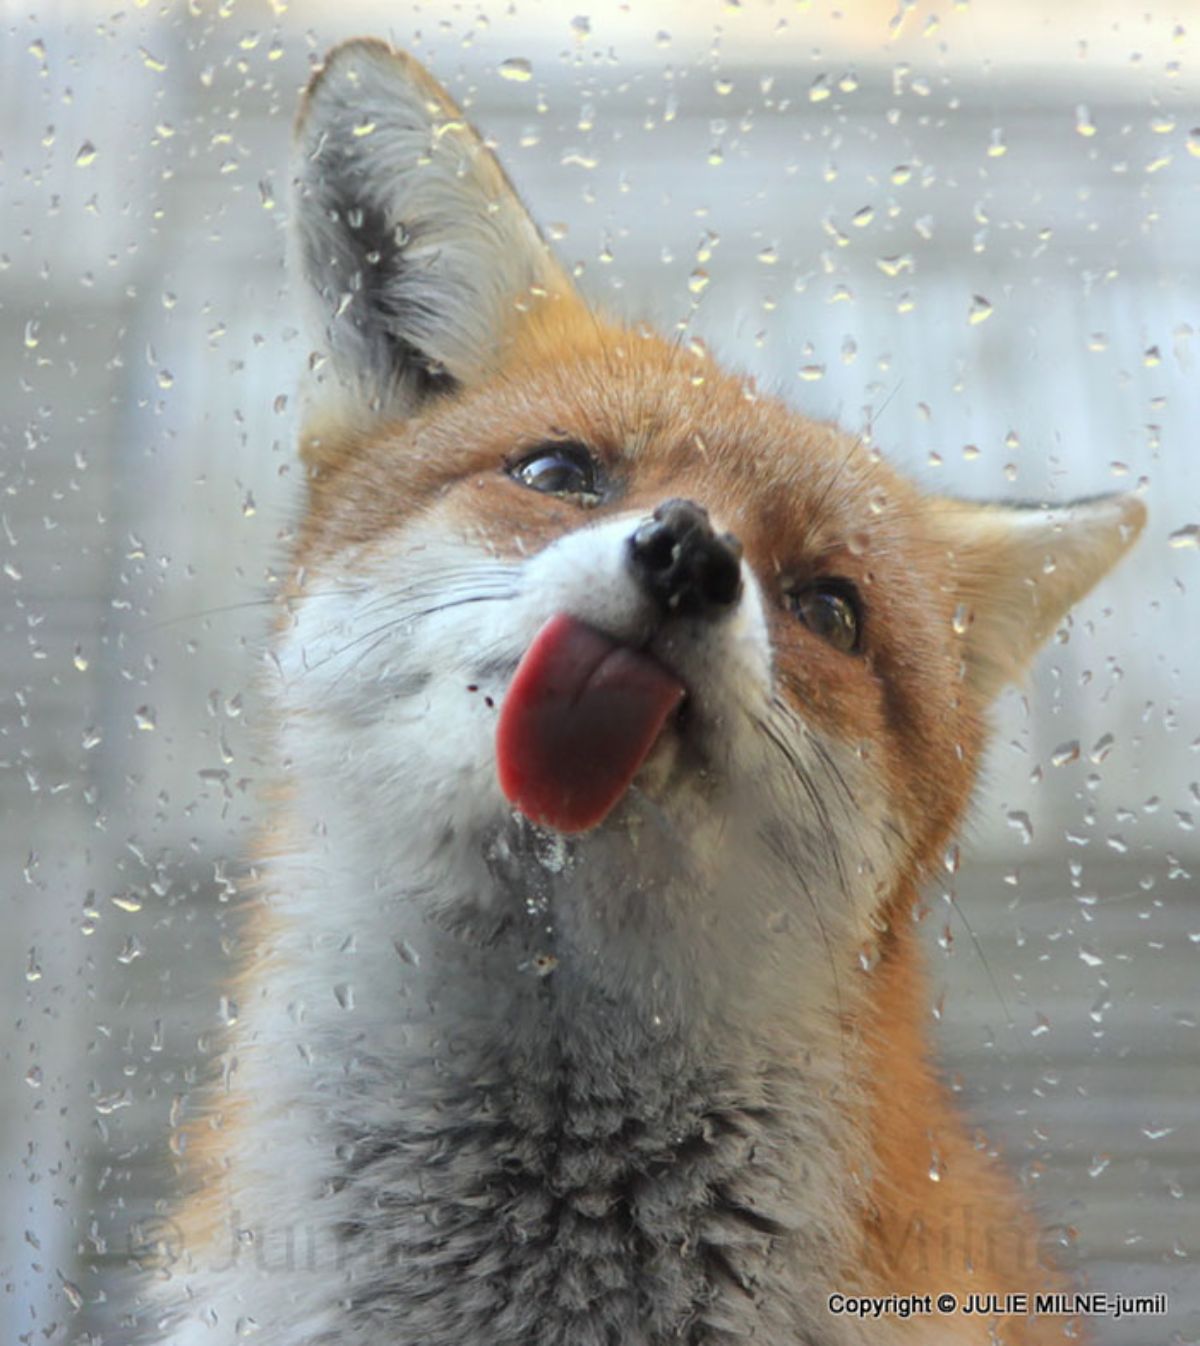 brown and white fox licking glass with water droplets all over